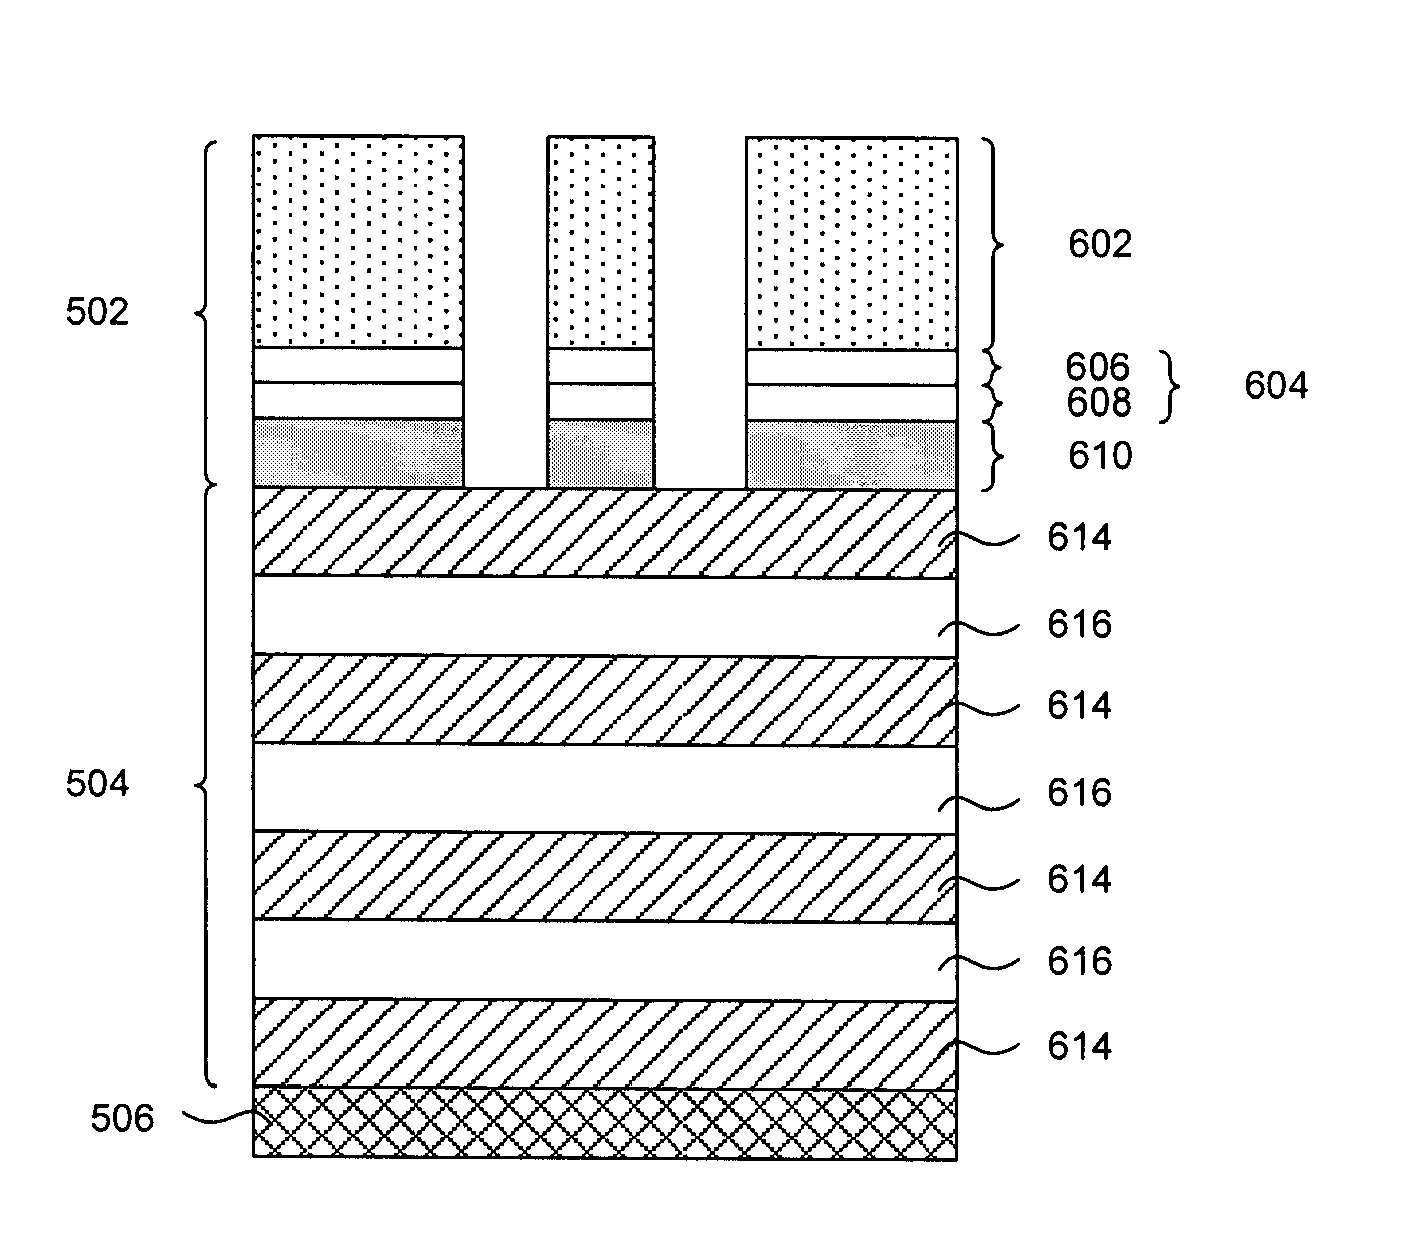 Method of etching high aspect ratio features in a dielectric layer